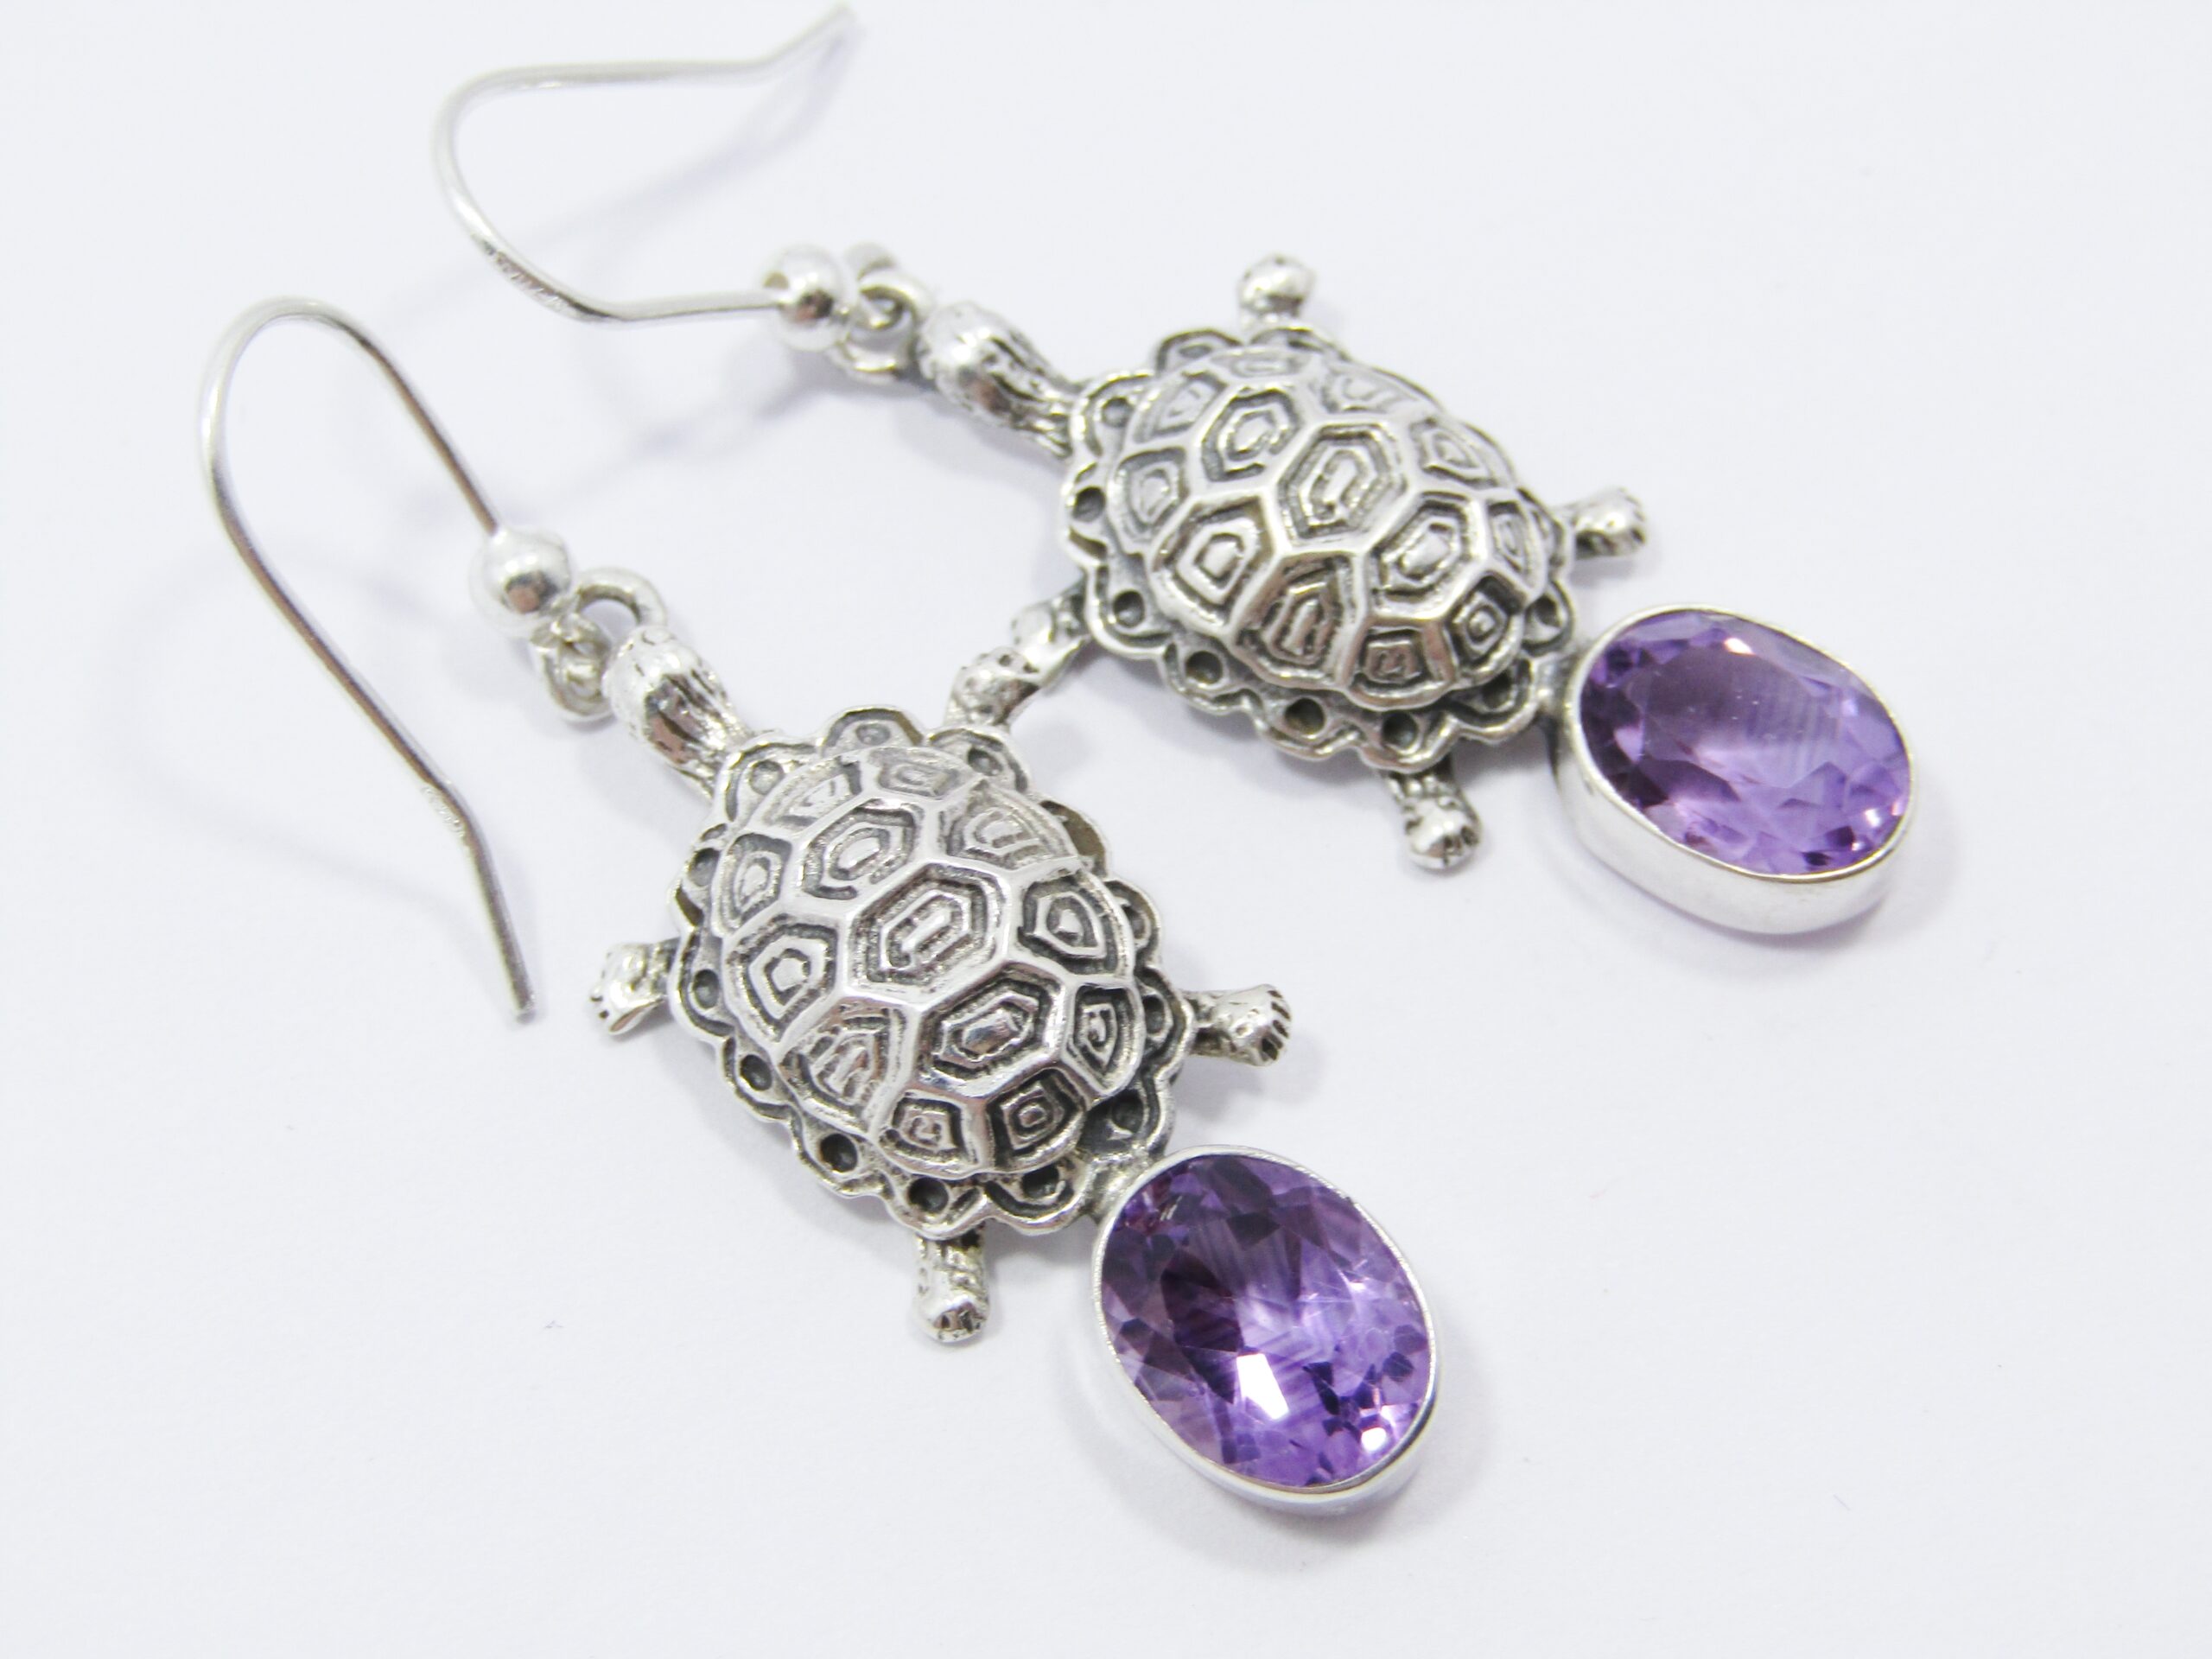 A Gorgeous Pair of Turtle Earrings With Amethyst Gemstones in Sterling Silver.